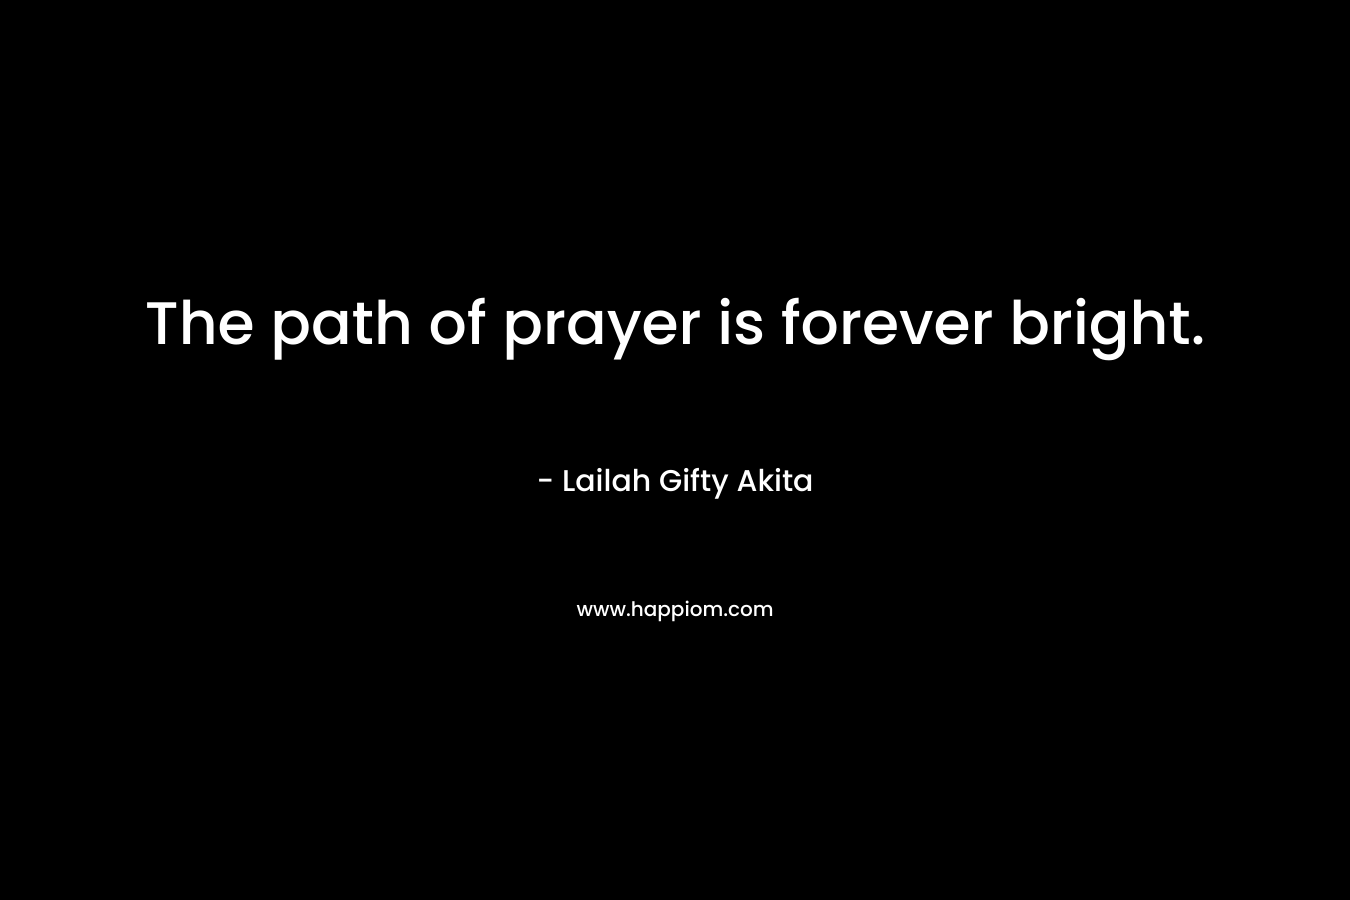 The path of prayer is forever bright.